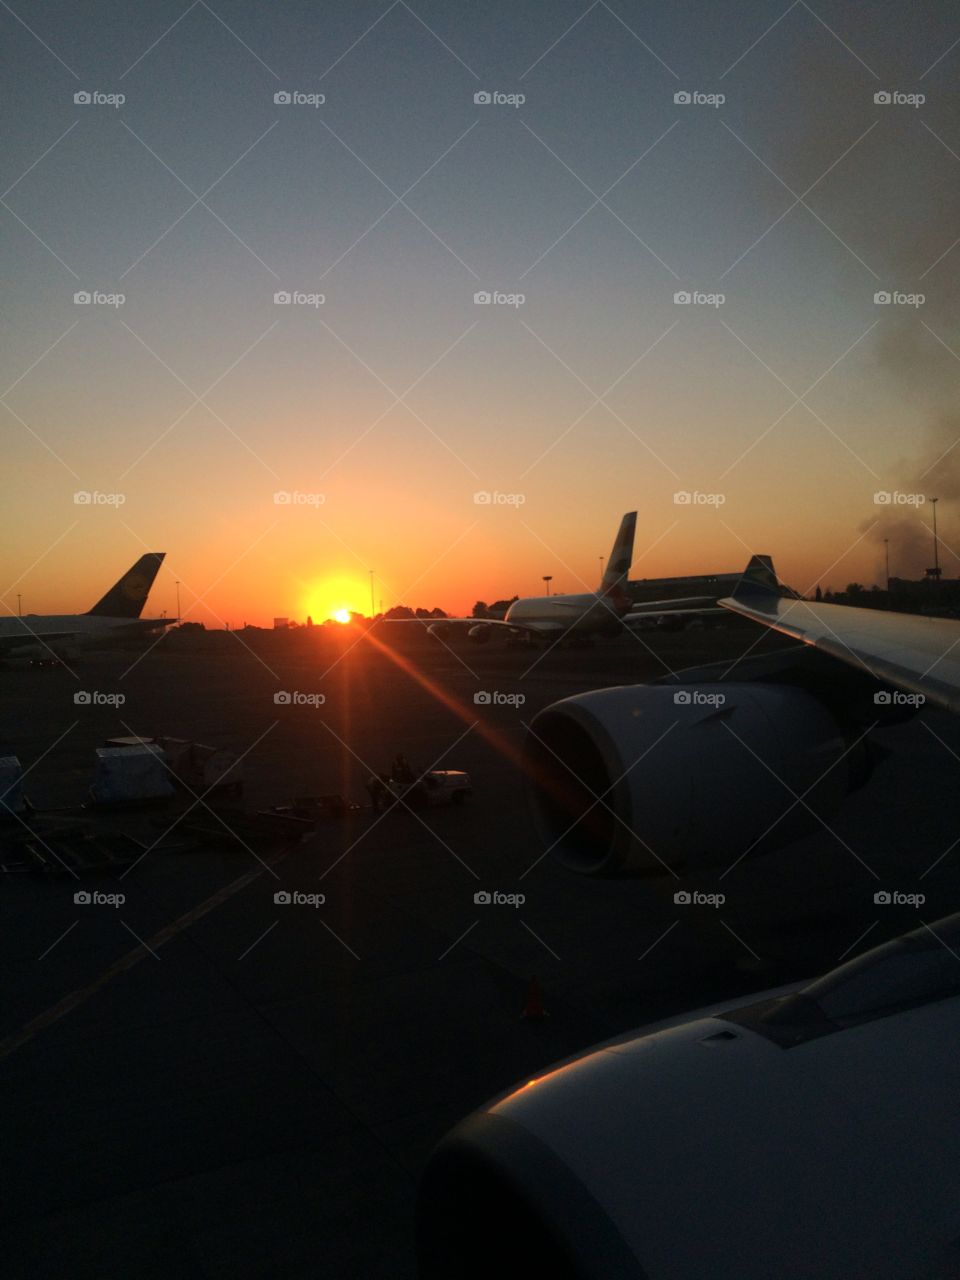 south african sunsets . aviation
airports 
aircrafts 
south africa 
Roots